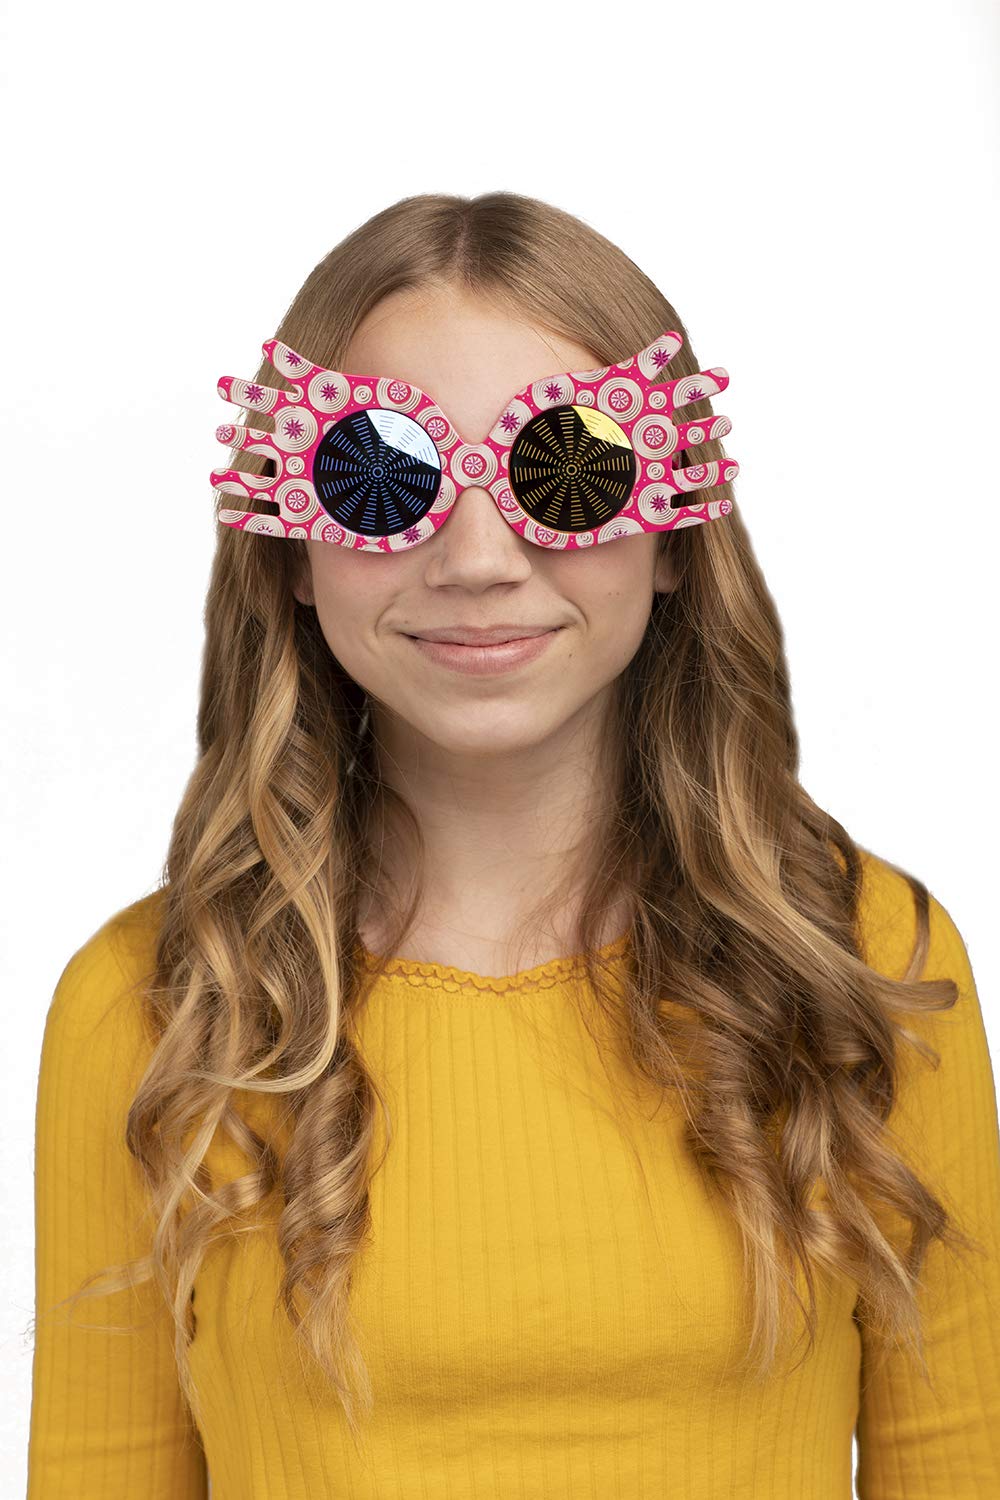 Sun-Staches Official Luna Lovegood Character Sunglasses Novelty Costume Party Favor Sunglasses UV400 Pink